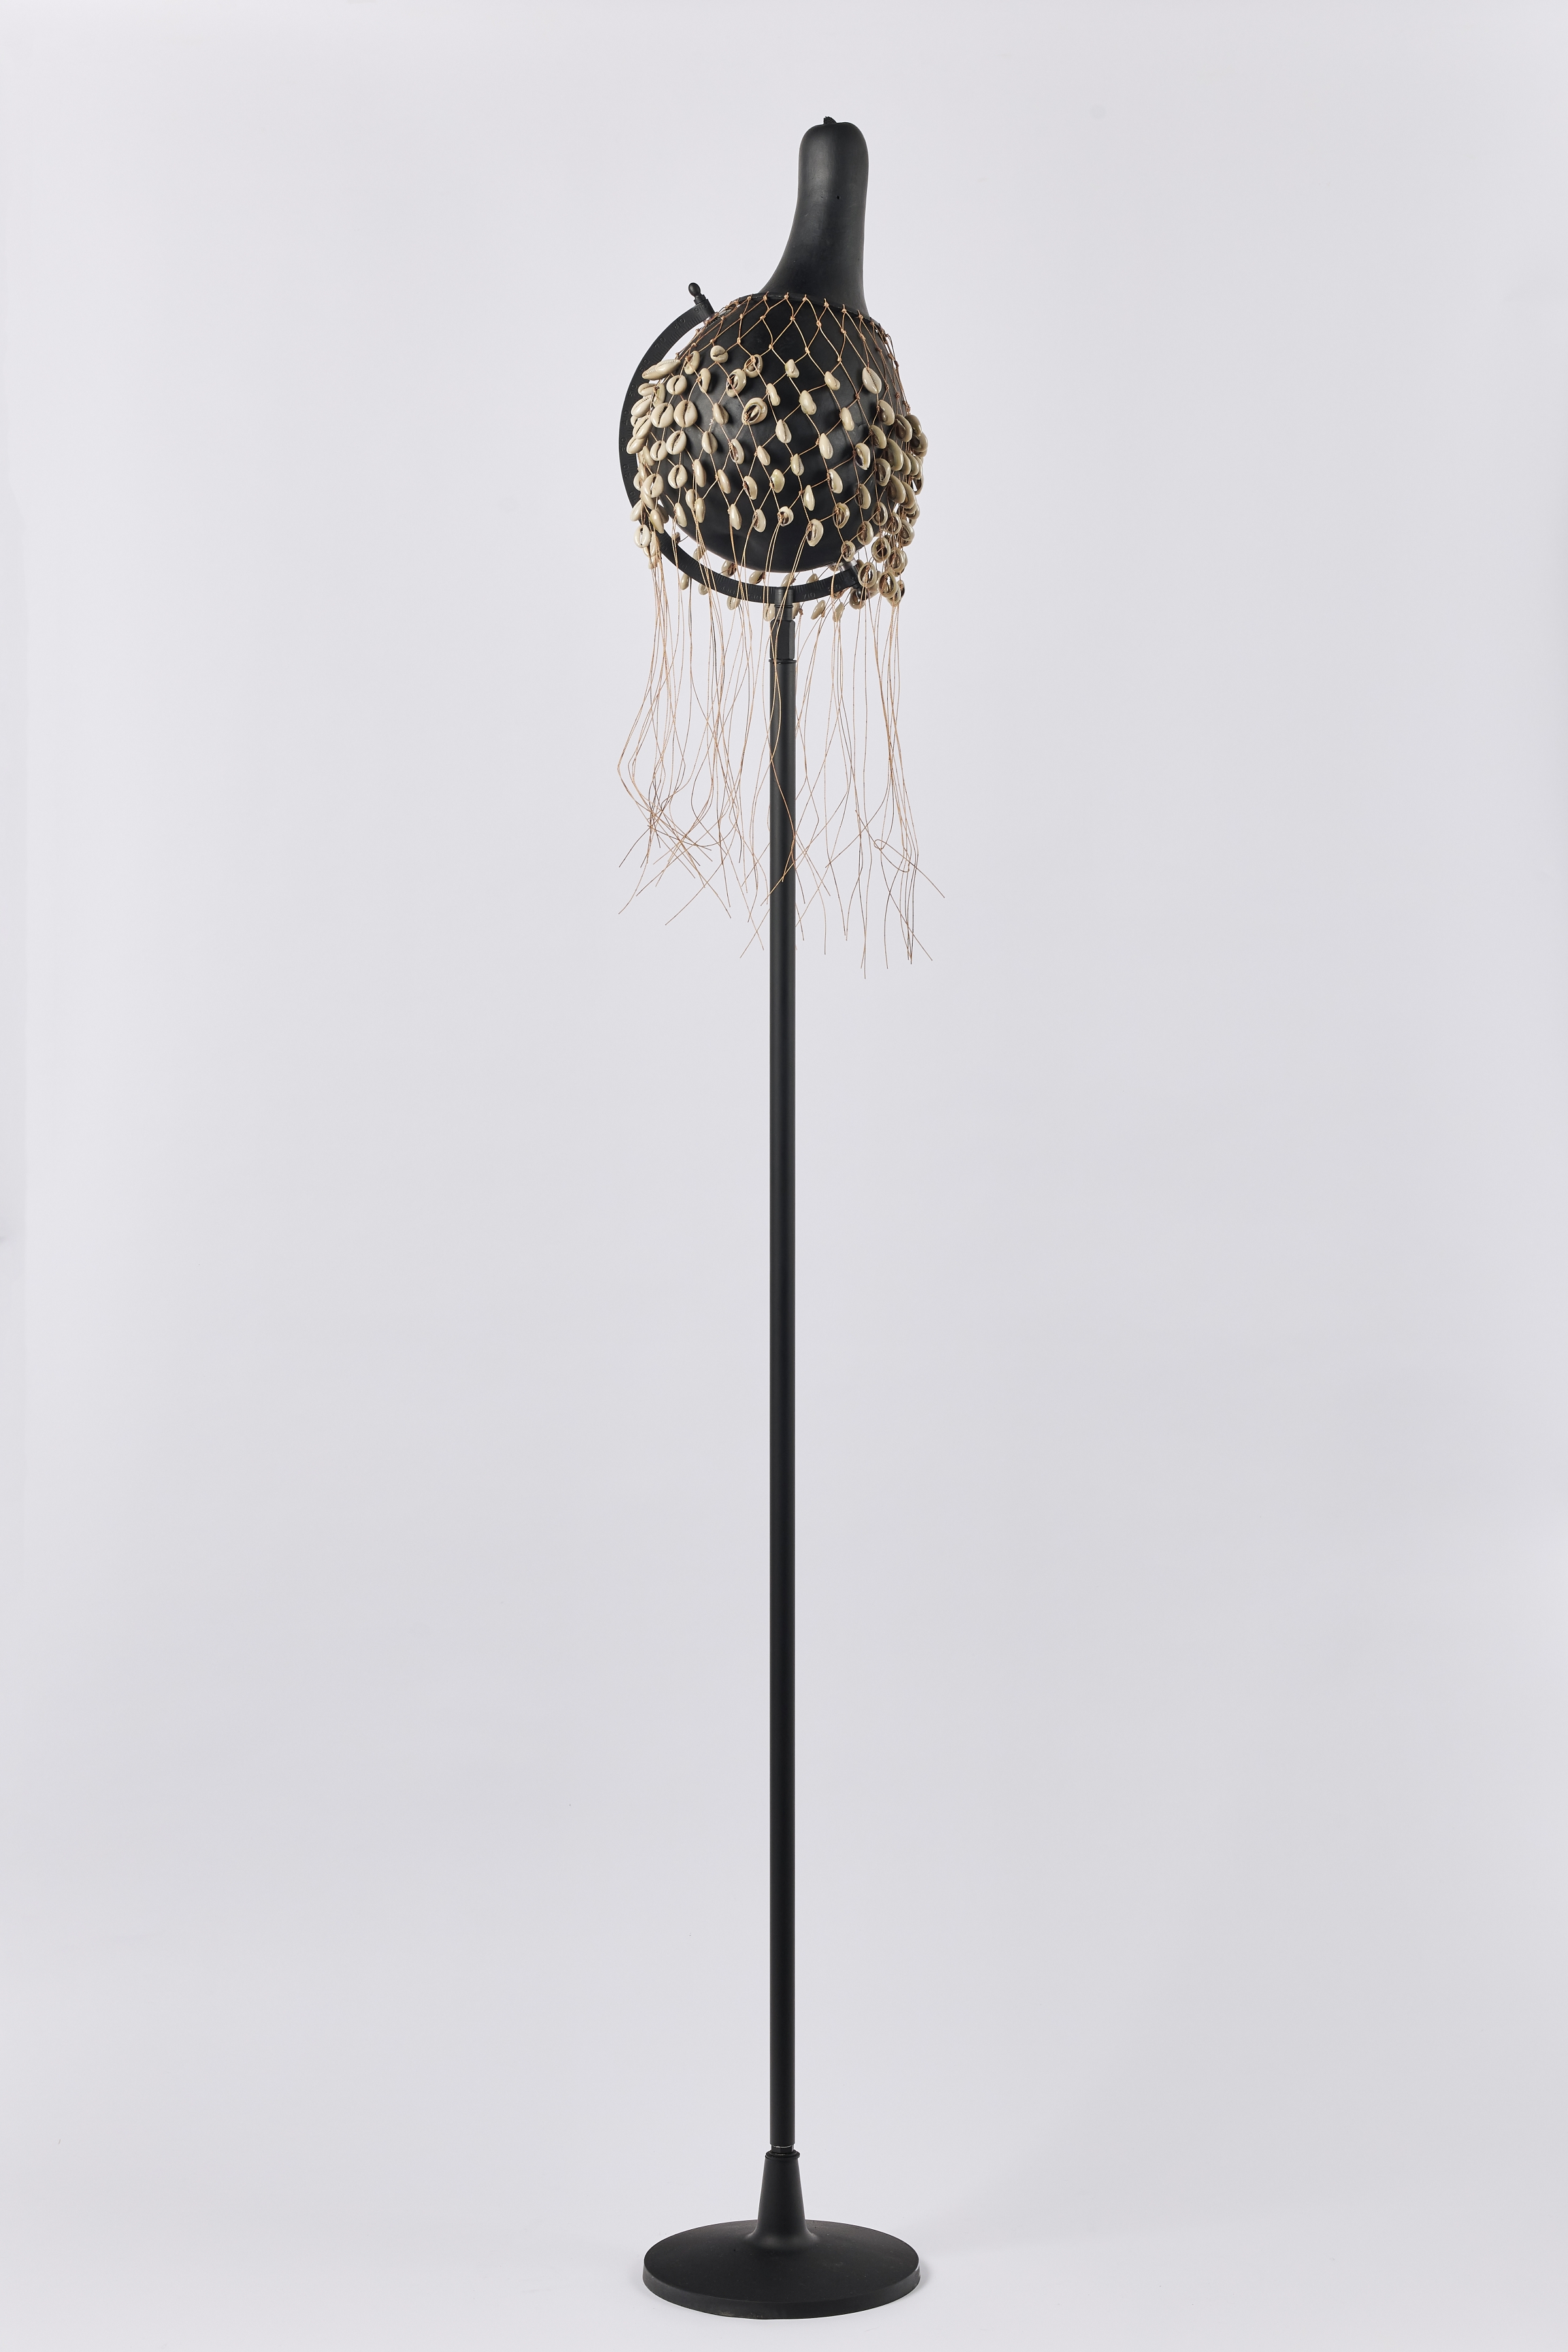 un voile with pillar

2021

altered calabash, black primer, cowry shell veil on steel and aluminium stand

167.5 x 27.2 x 27.2 cm

sales enquiries

&nbsp;